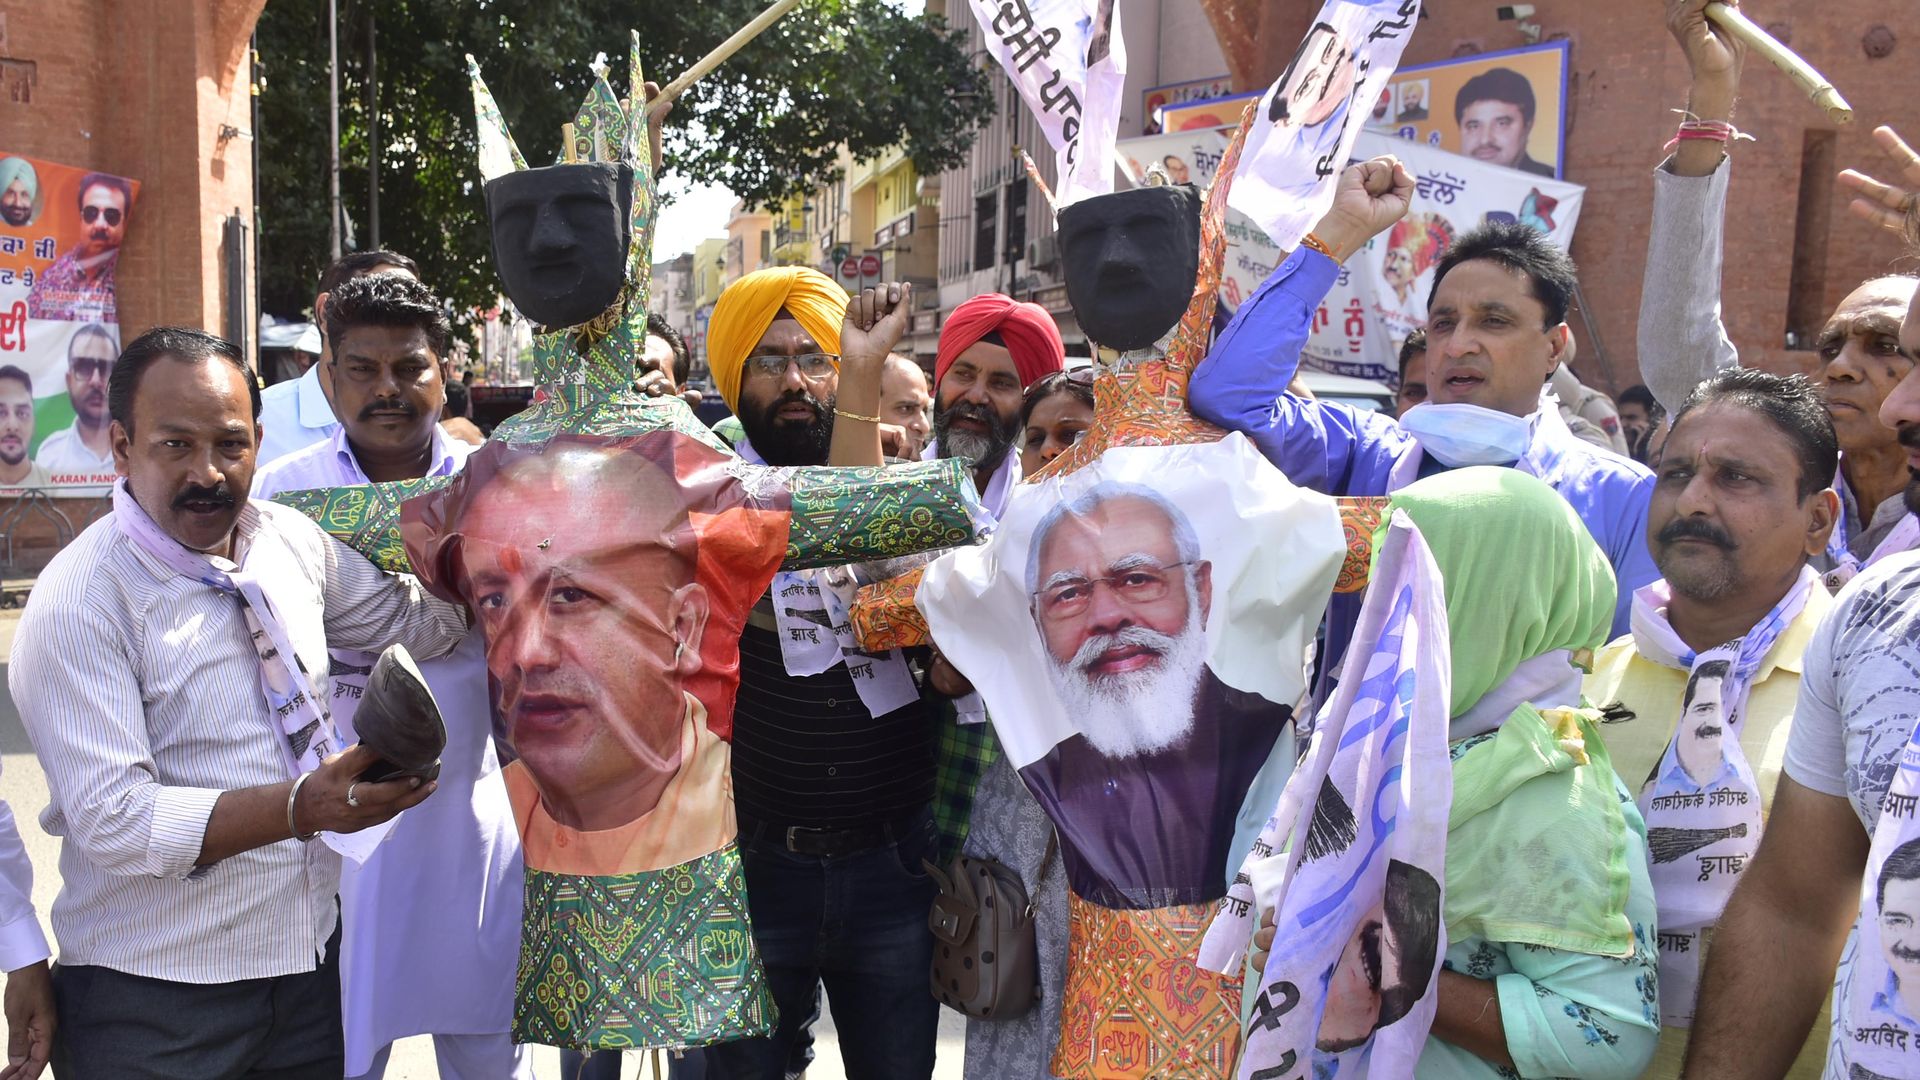 Farmers shout carry effigies to burn with the pictures of India's Prime Minister Narendra Modi and others during a protest in Lakhimpur Kheri, on October 5, 2021 in Amritsar, India.